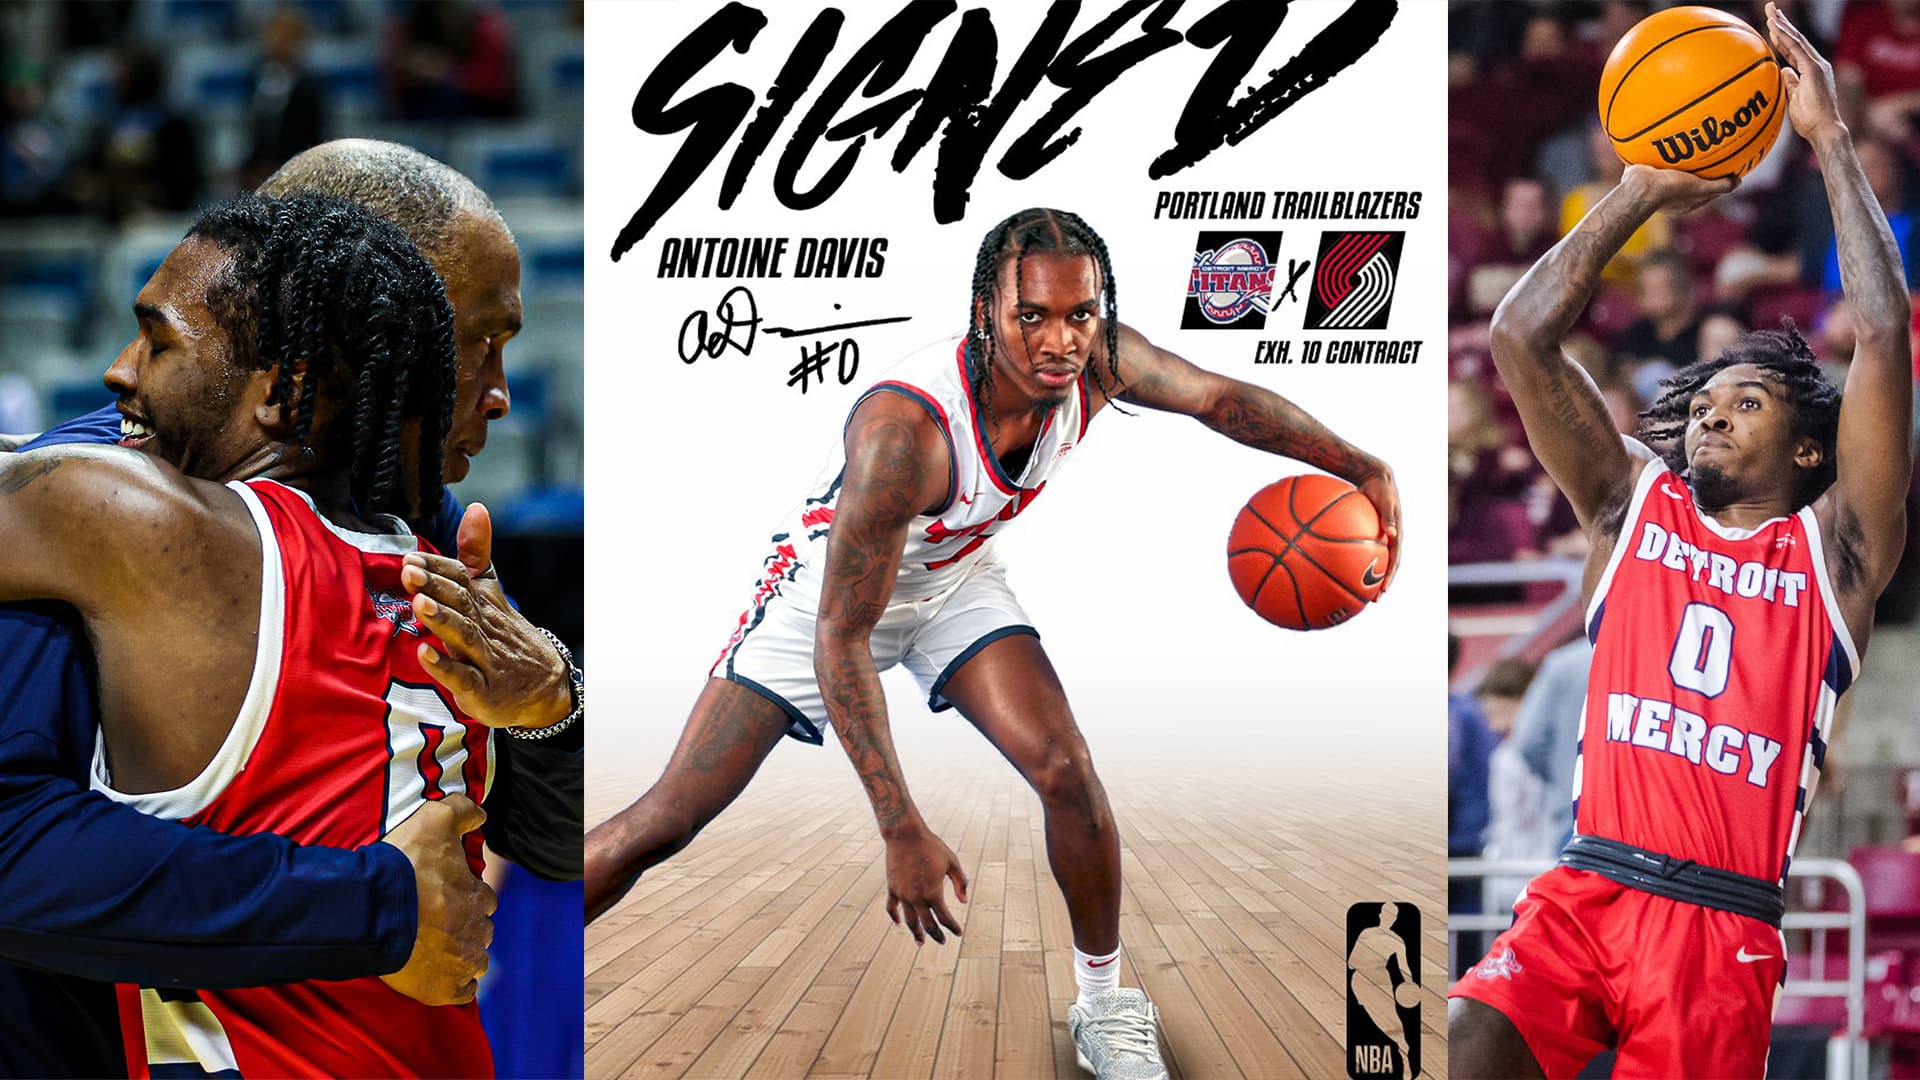 A graphic features Antoine Davis dribbling a basketball on a court. Text reads, Signed, Antoine Davis, Portland Trail Blazers, Exh. 10 Contract. Logos on the graphic feature ɫۺϾþ Mercy Titans, Portland Trail Blazers and NBA. Photos on the left and right of the graphic also are of Davis, one hugging his father and the other shooting a basketball and wearing a red No. 0 ɫۺϾþ Mercy jersey.